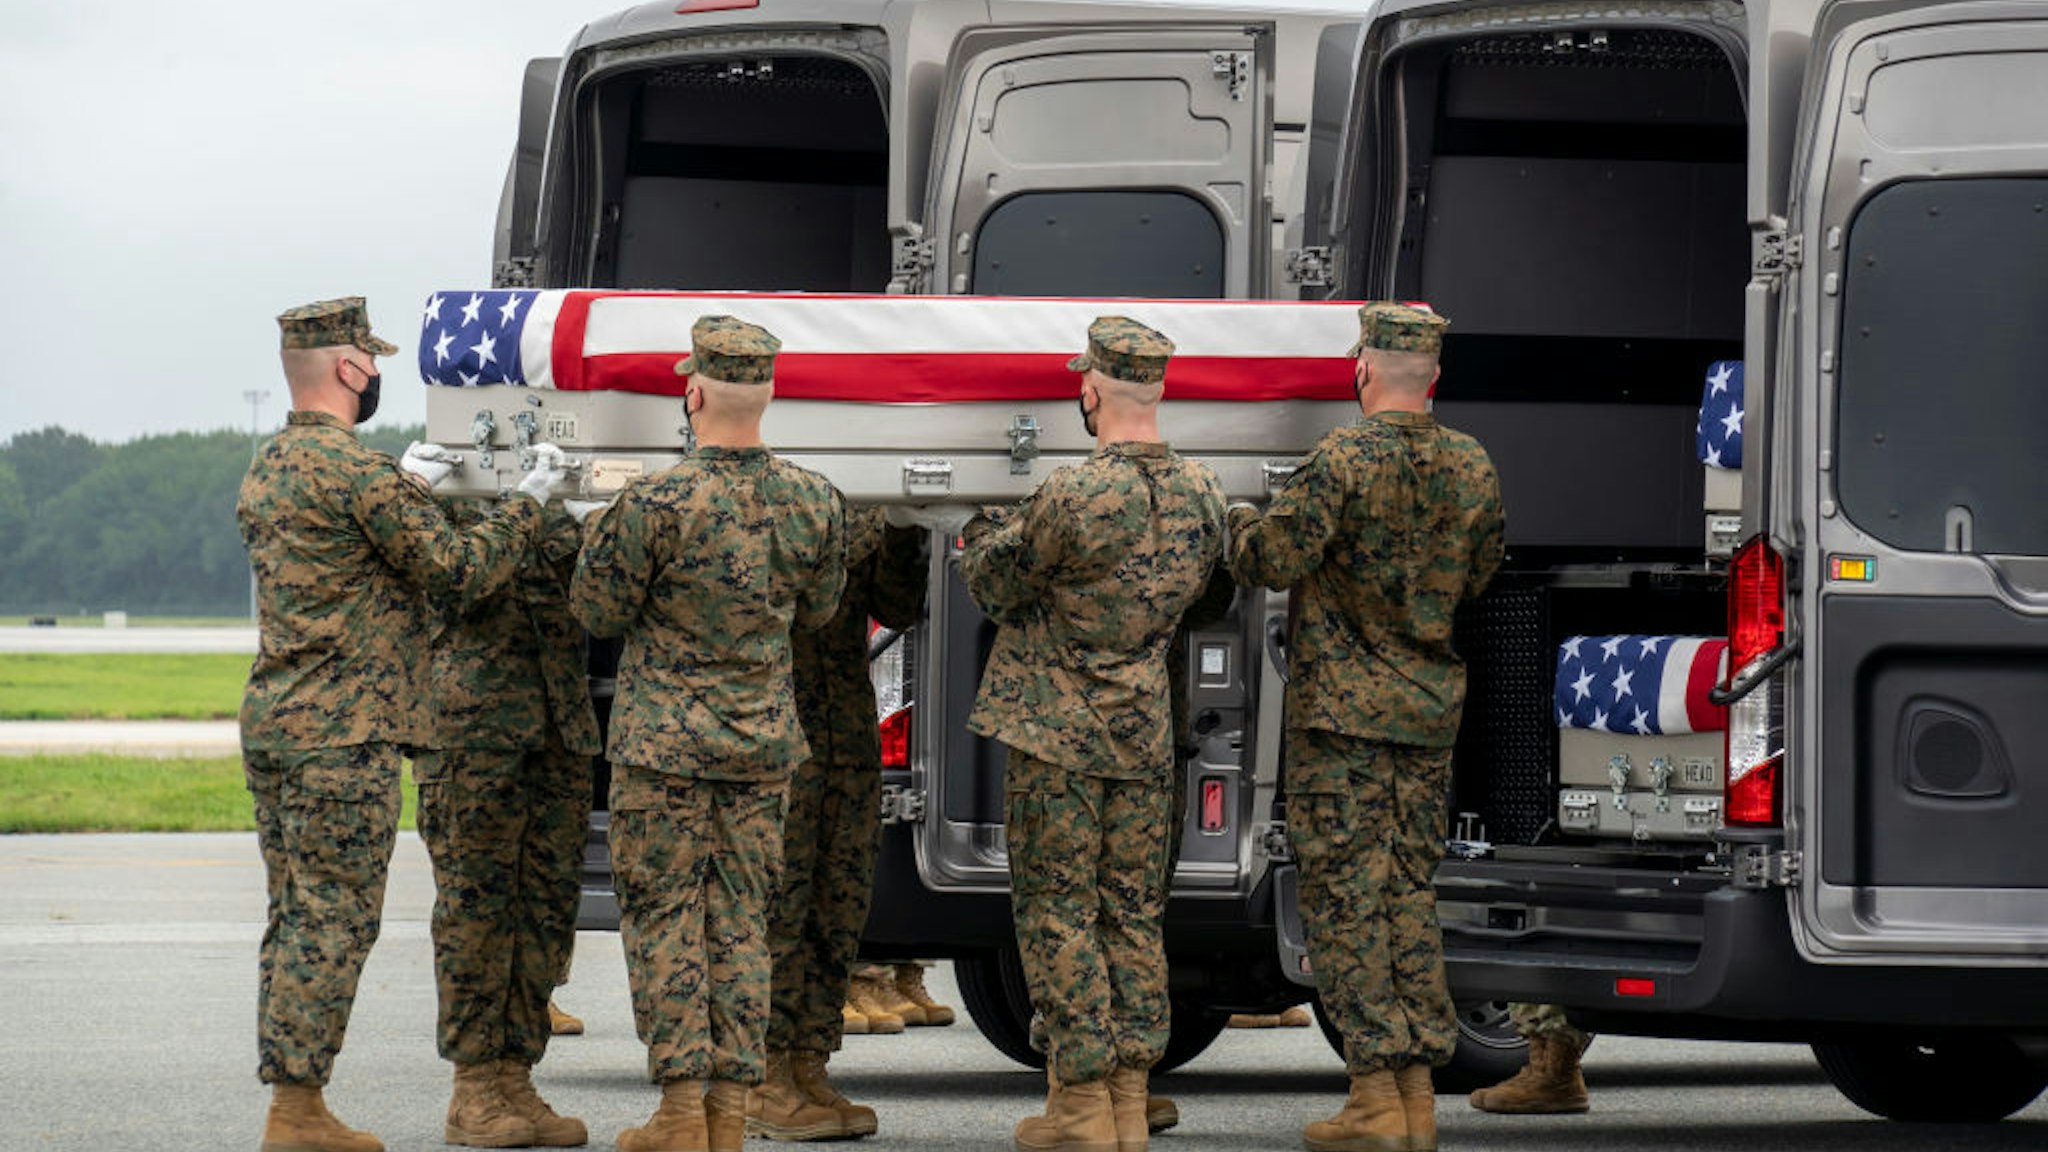 DOVER, DELAWARE - AUGUST 29: In this handout photo provided by the U.S. Air Force, a U.S. Marine Corps carry team transfers the remains of Marine Corps Lance Cpl. Kareem M. Nikoui of Norco, California, Aug. 29, 2021 at Dover Air Force Base, Delaware. Nikoui was assigned to 2nd Battalion, 1st Marine Regiment, 1st Marine Division, I Marine Expeditionary Force, Camp Pendleton, California. (Photo by Jason Minto/U.S. Air Force via Getty Images)